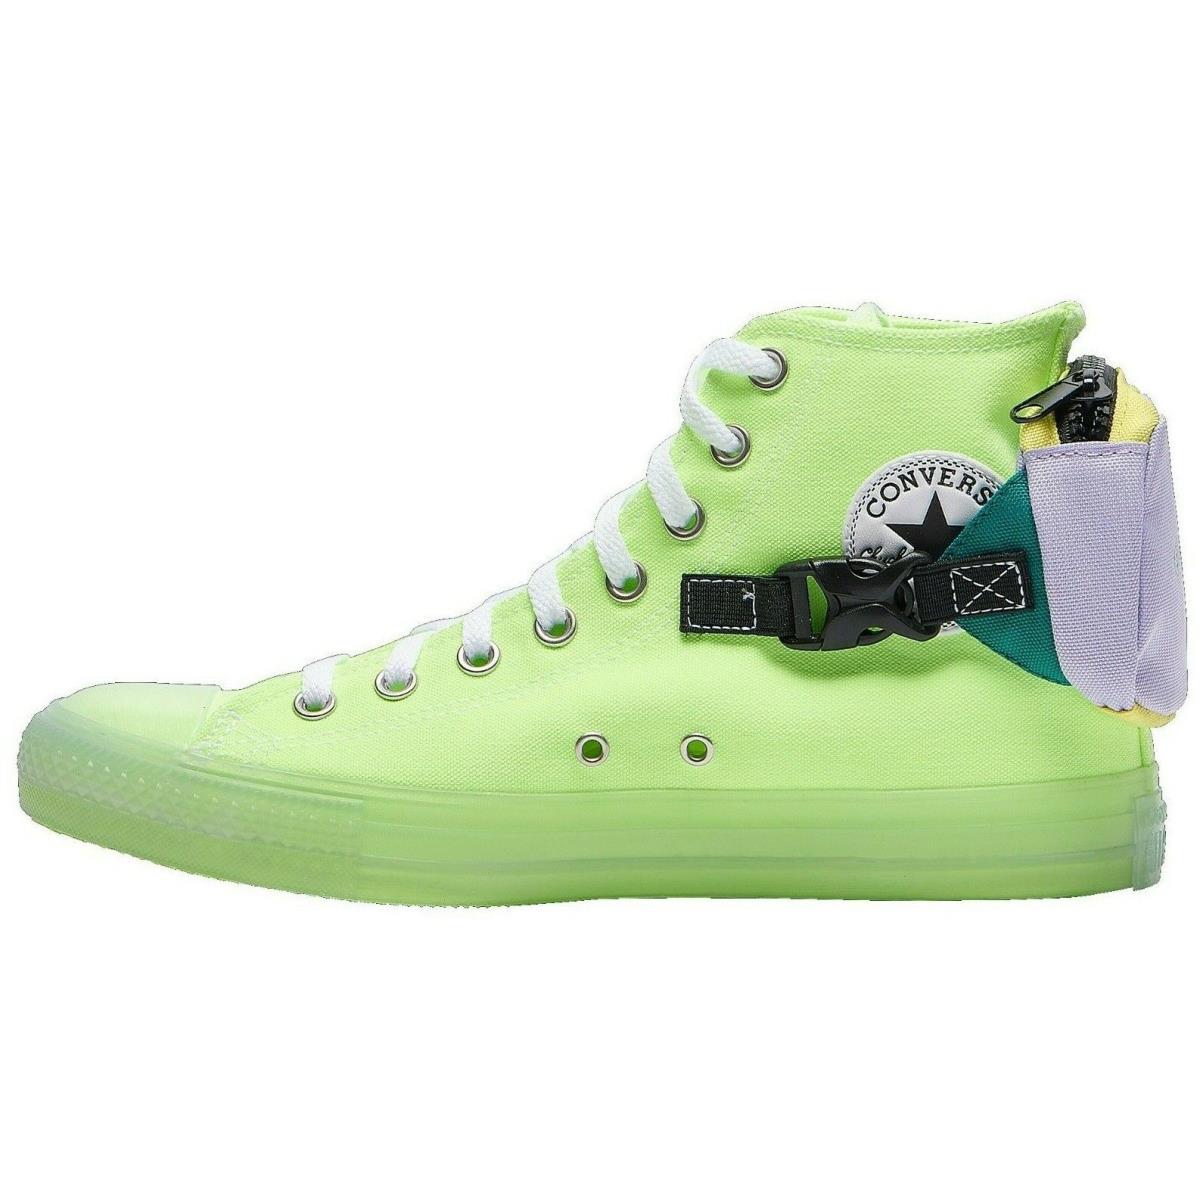 Converse Chuck Taylor All Star Buckle Up Hi Shoes 169030C Multi Sizes Green/vio